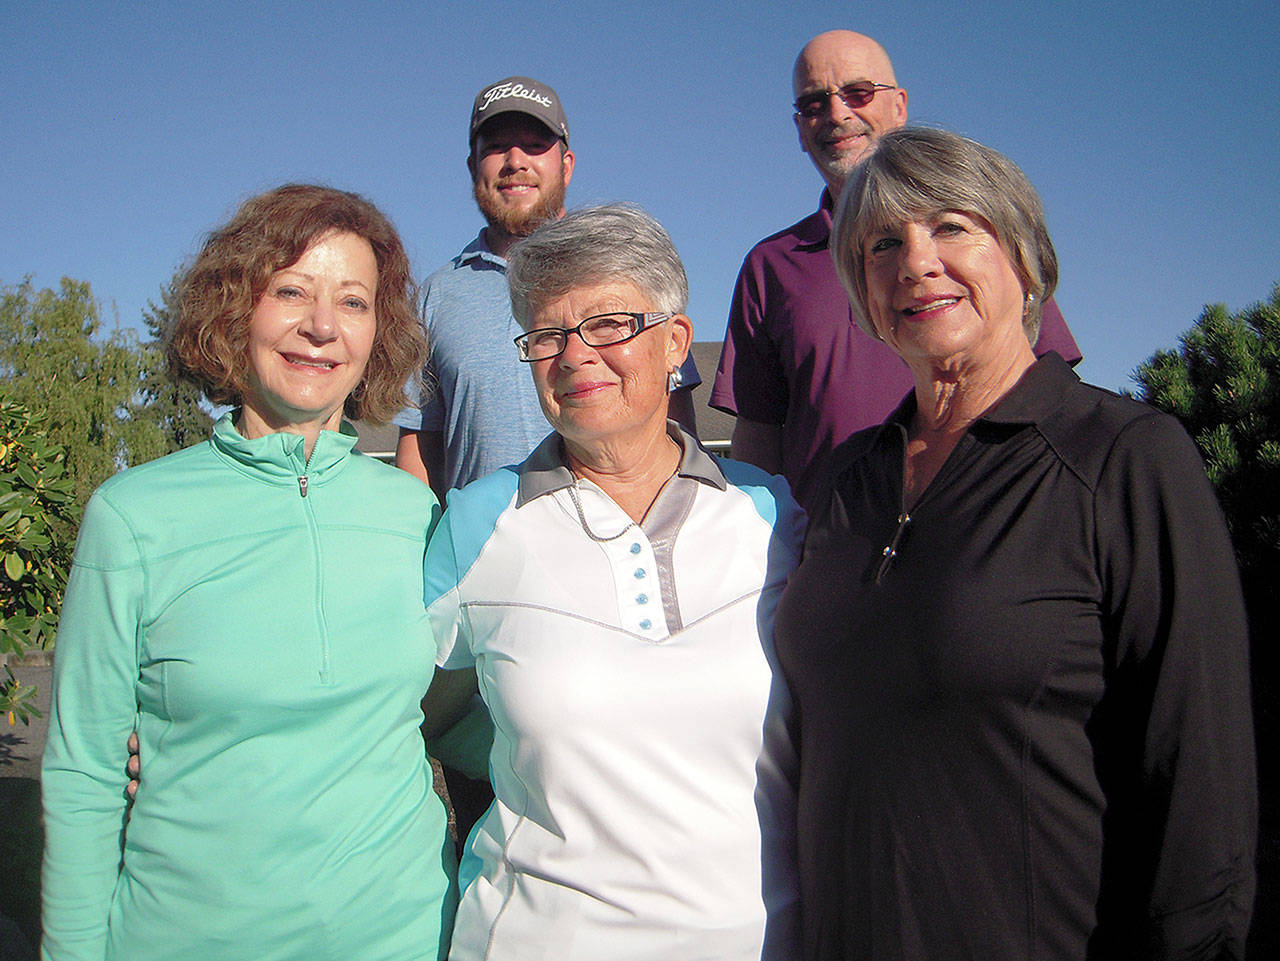 Contributed photo — Useless Bay Golf and Country Club’s 2017 tournament champions pose for a photo. Front row: Mary Jo Sievers (Ladies’ nine-hole champion), Diane Anderson (Women’s Association champion) and Nancy Allison (Women’s Association senior champion). Back row: Ty Kane (Men’s Club champion) and Kirk Bohrer (Men’s Club senior champion).